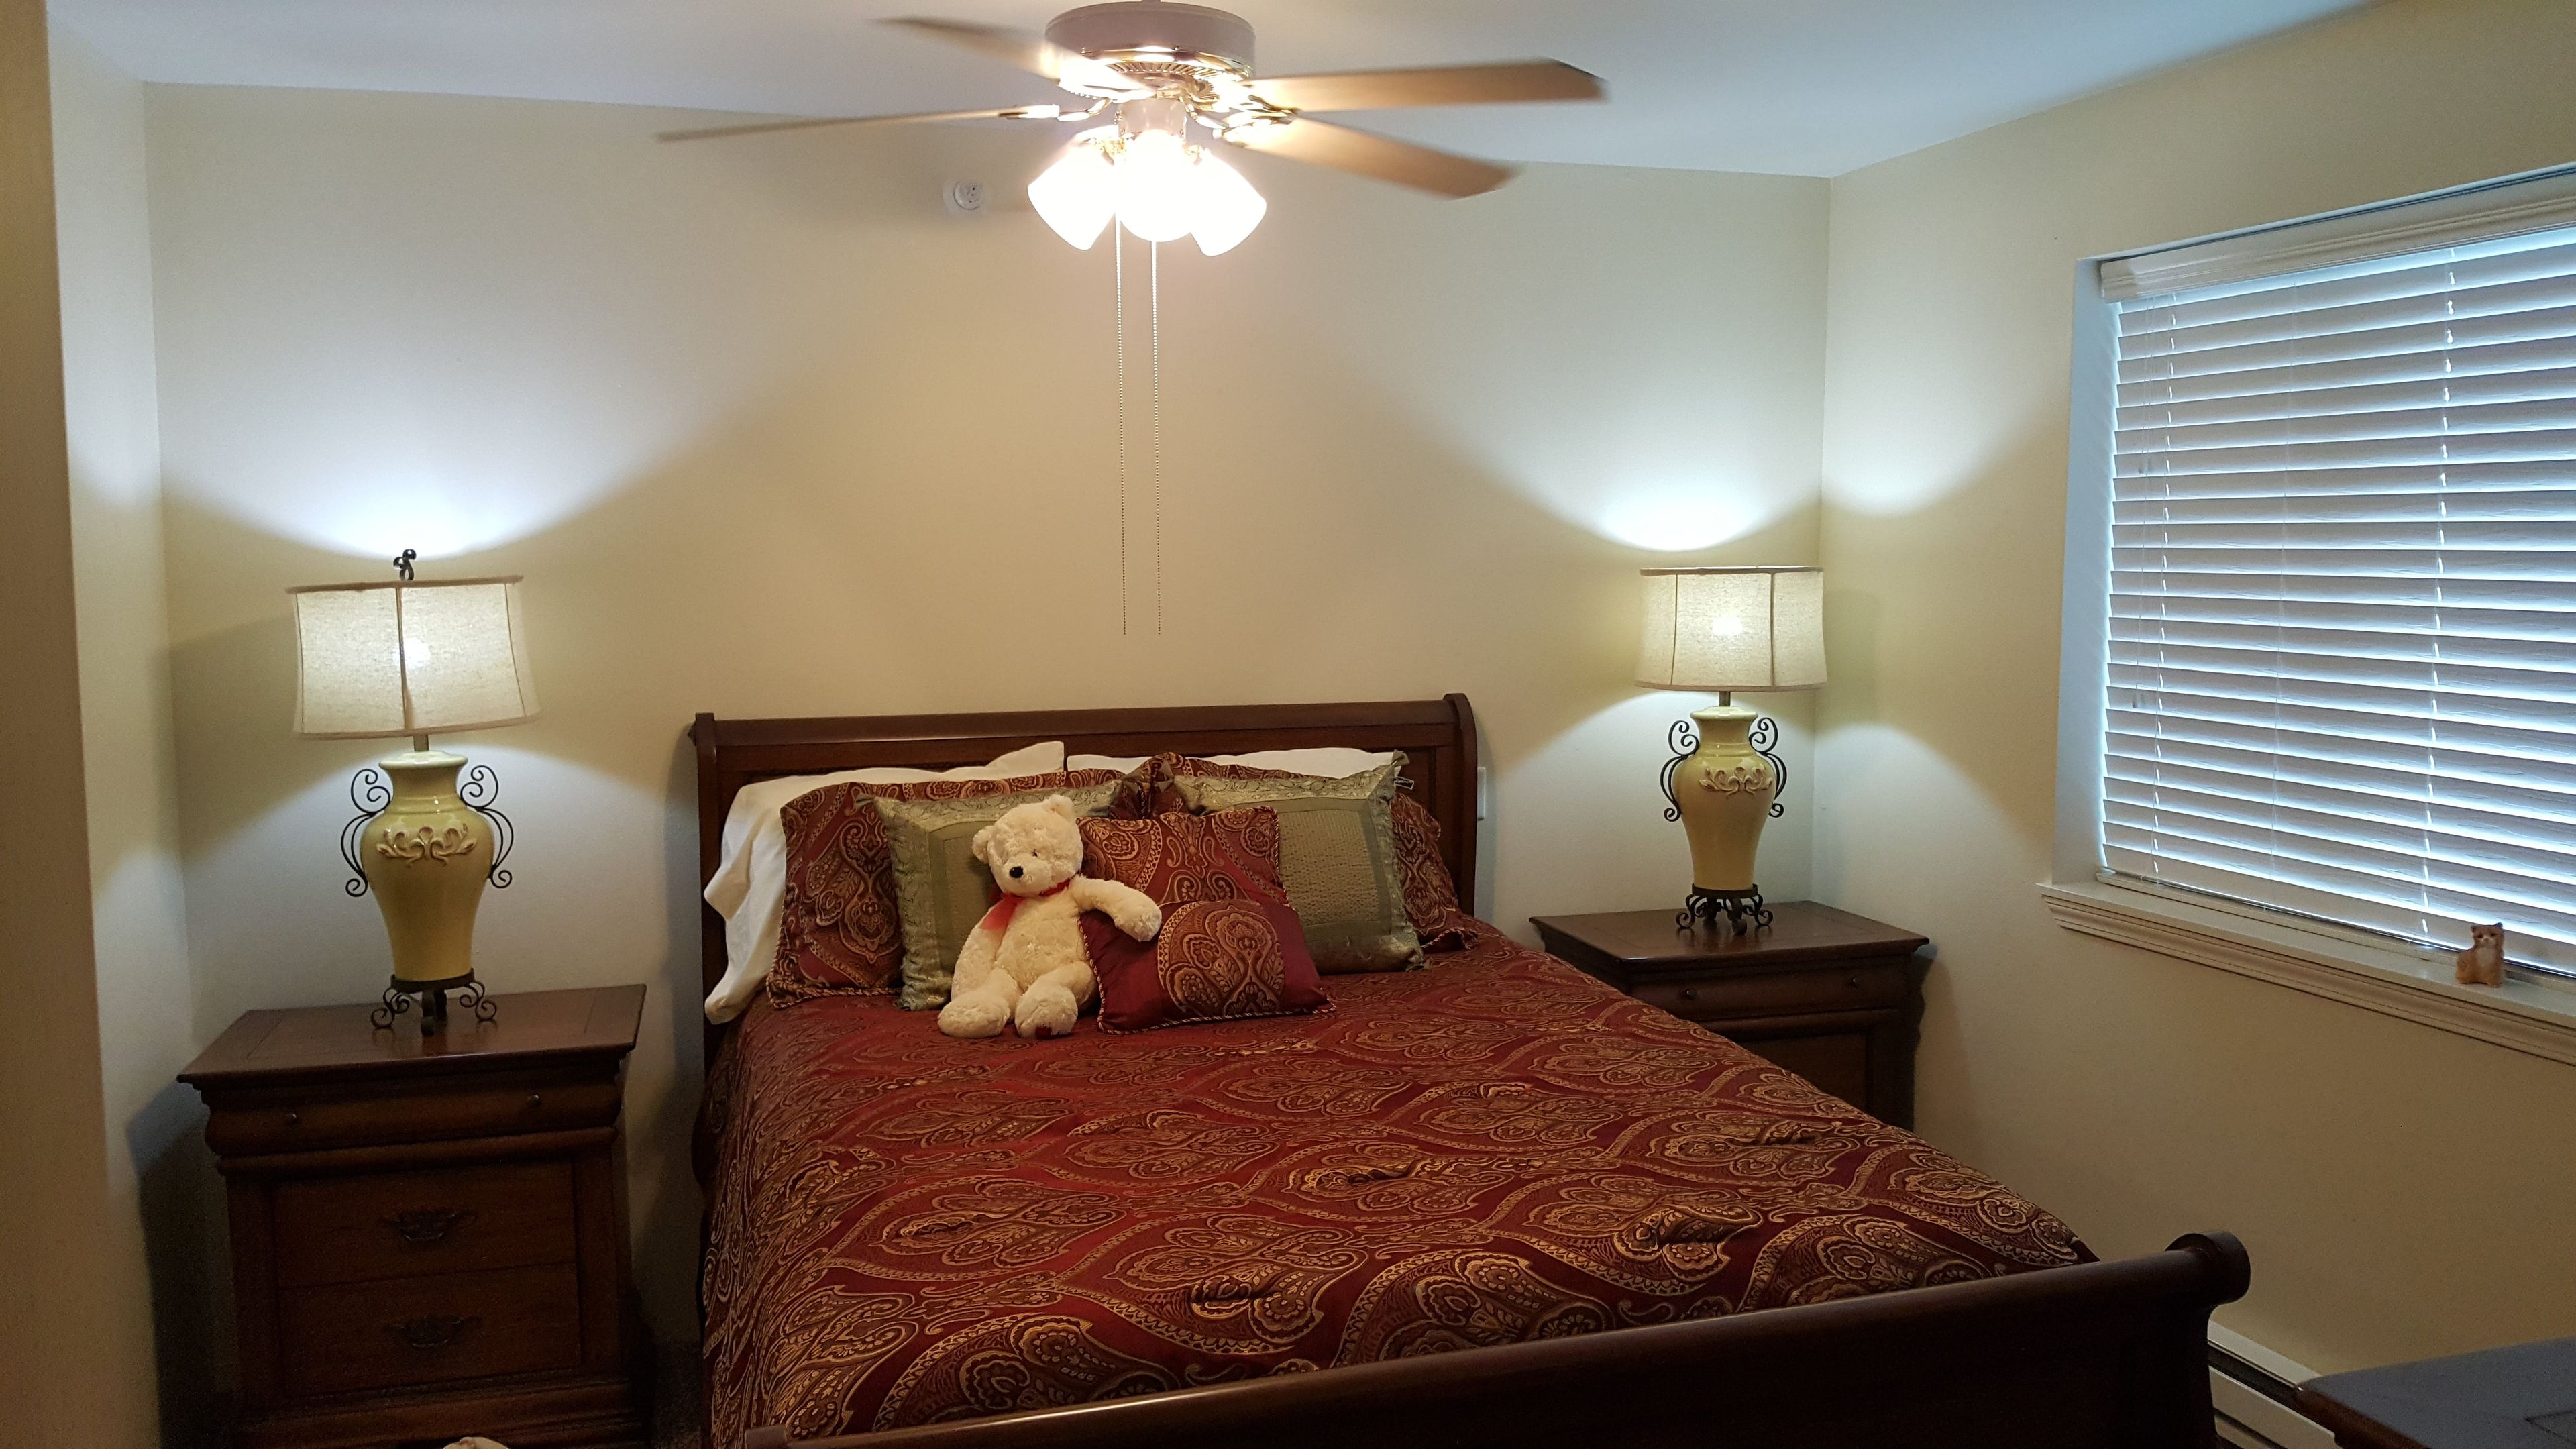 Interior view of a furnished bedroom at Solstice Senior Living At Lees Summit with modern decor.